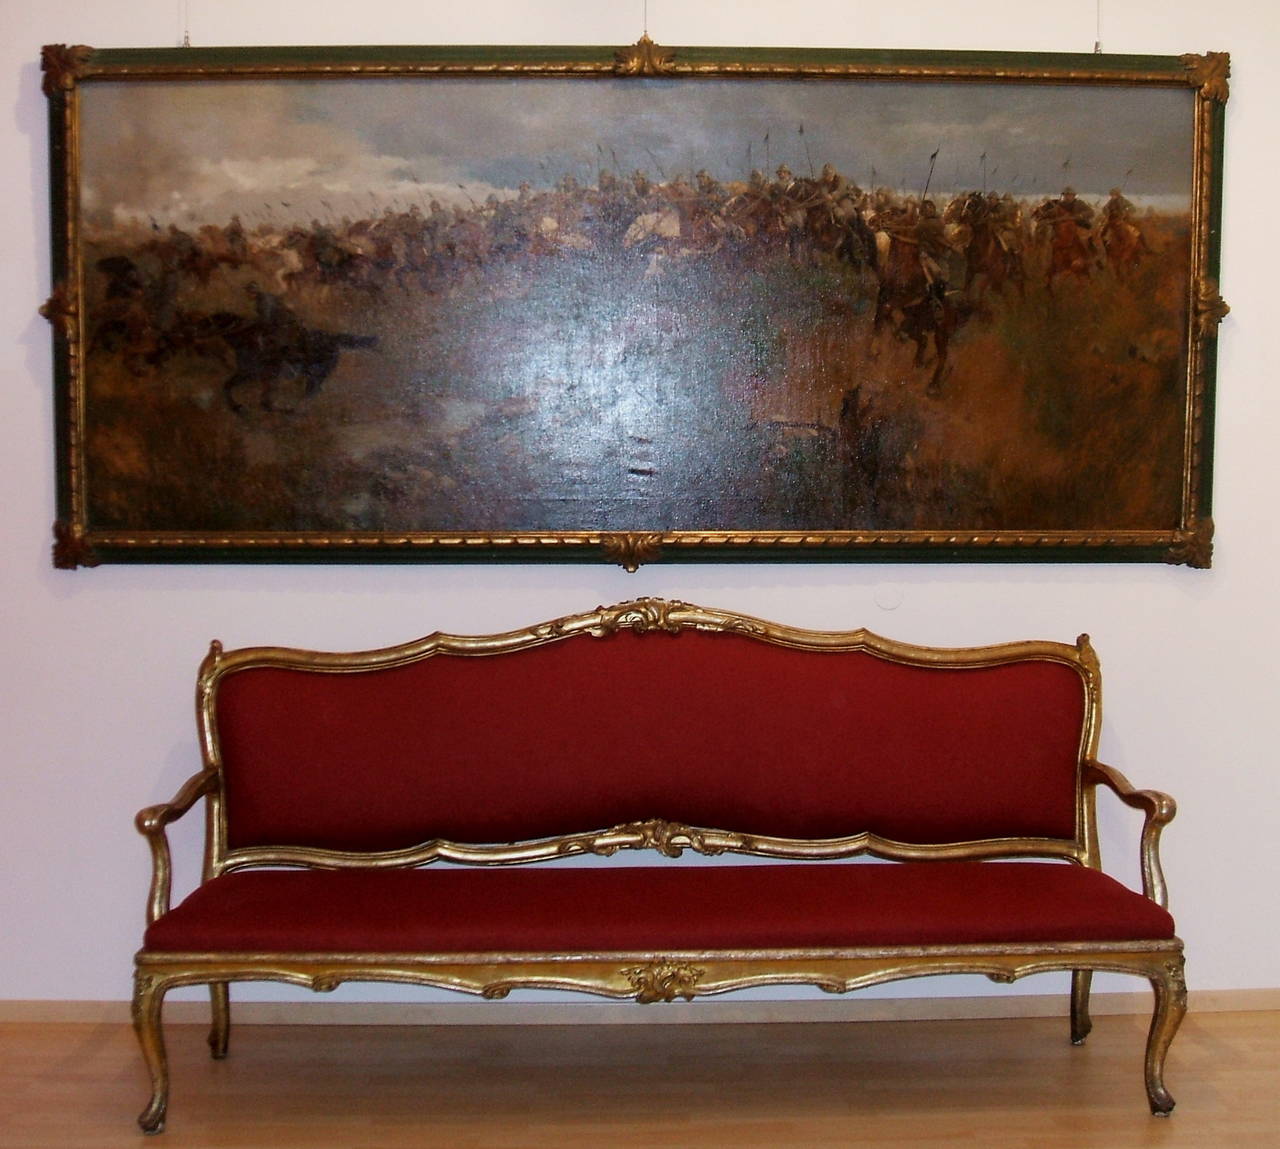 Pair of fine giltwood settees from 1750 with a light red fabric upholstery in original vintage condition. 
Made in Lucca, Tuscany.